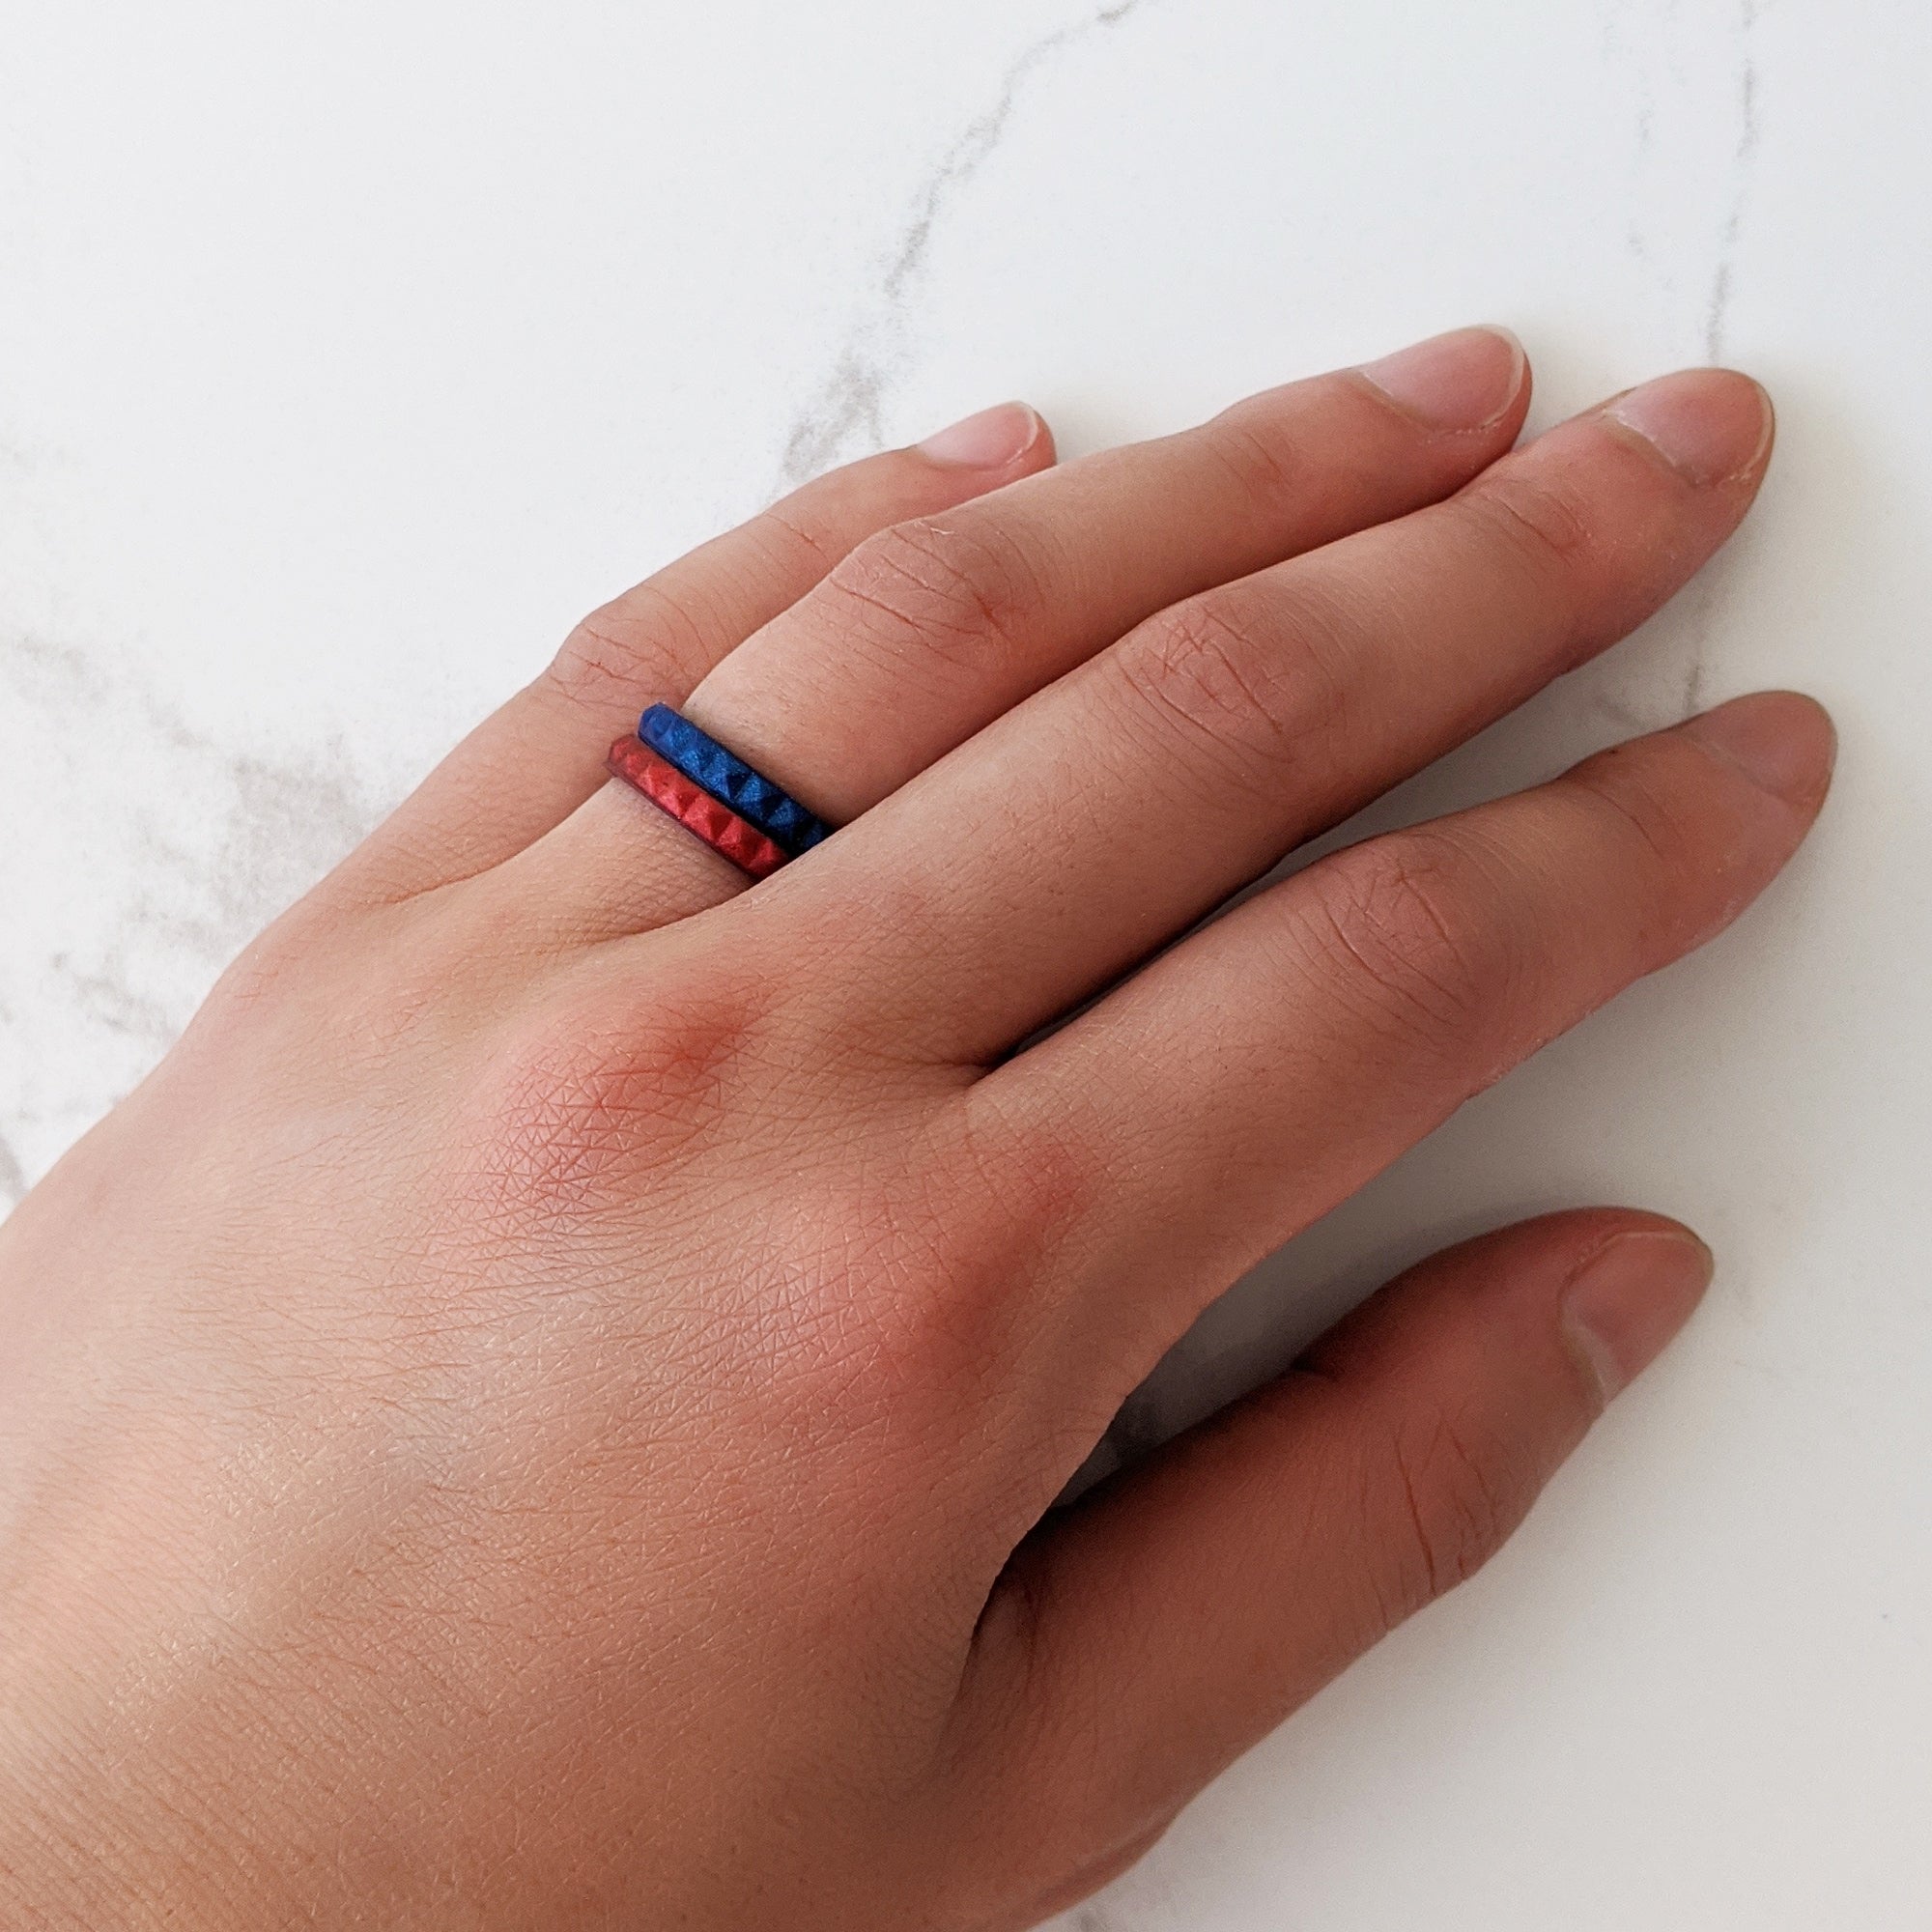 Metallic Blue Sapphire Pyramid Stackable Slim Thin Silicone Ring for Women - Knot Theory